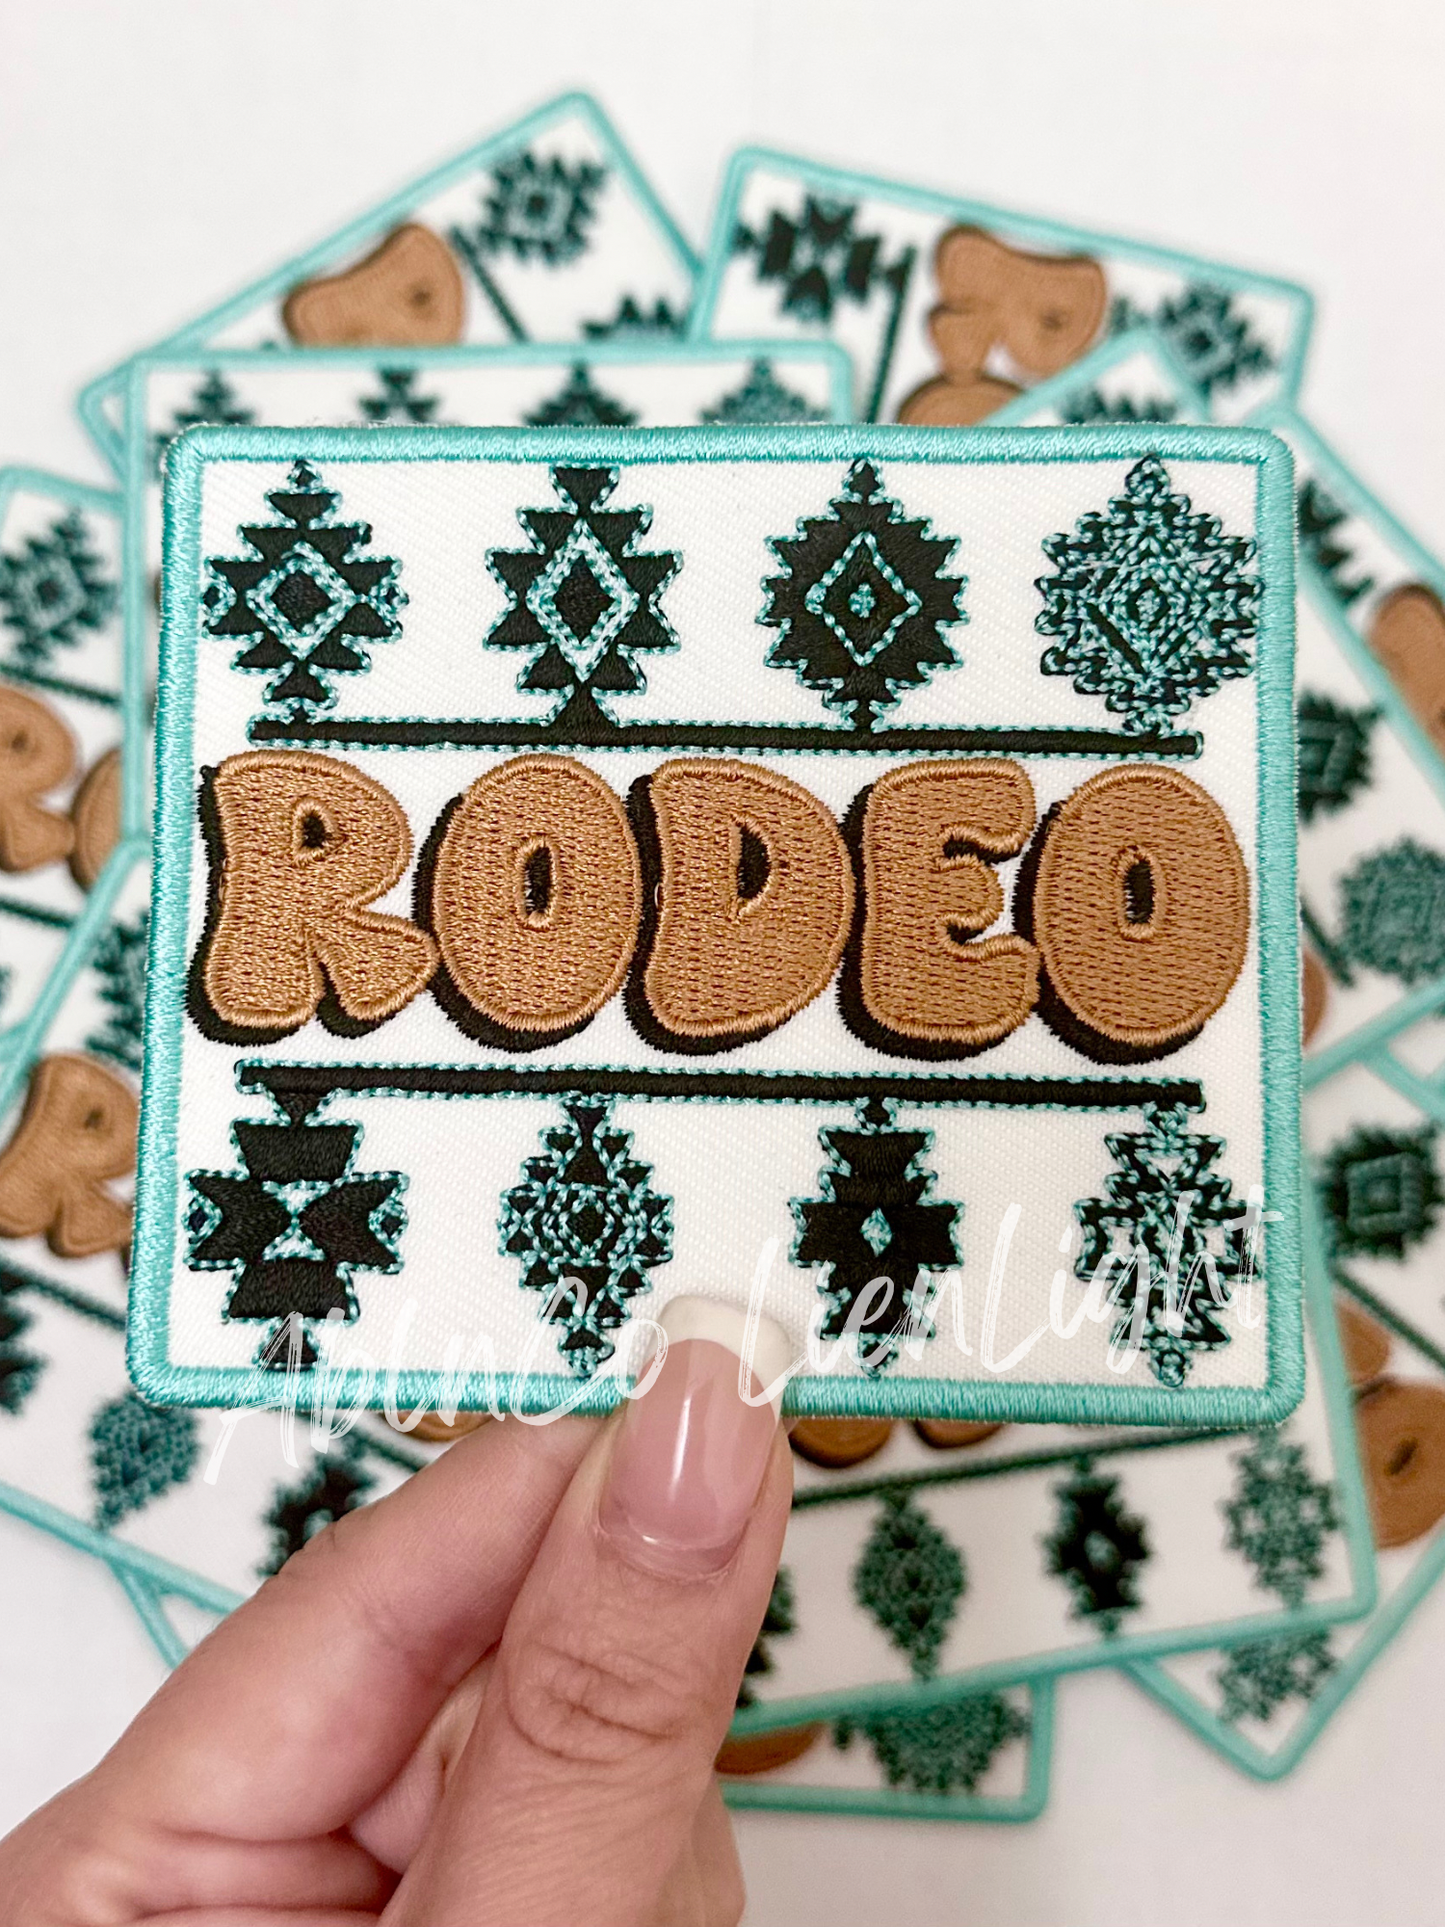 Rodeo turquoise patch trucker hat patches embroidery patch